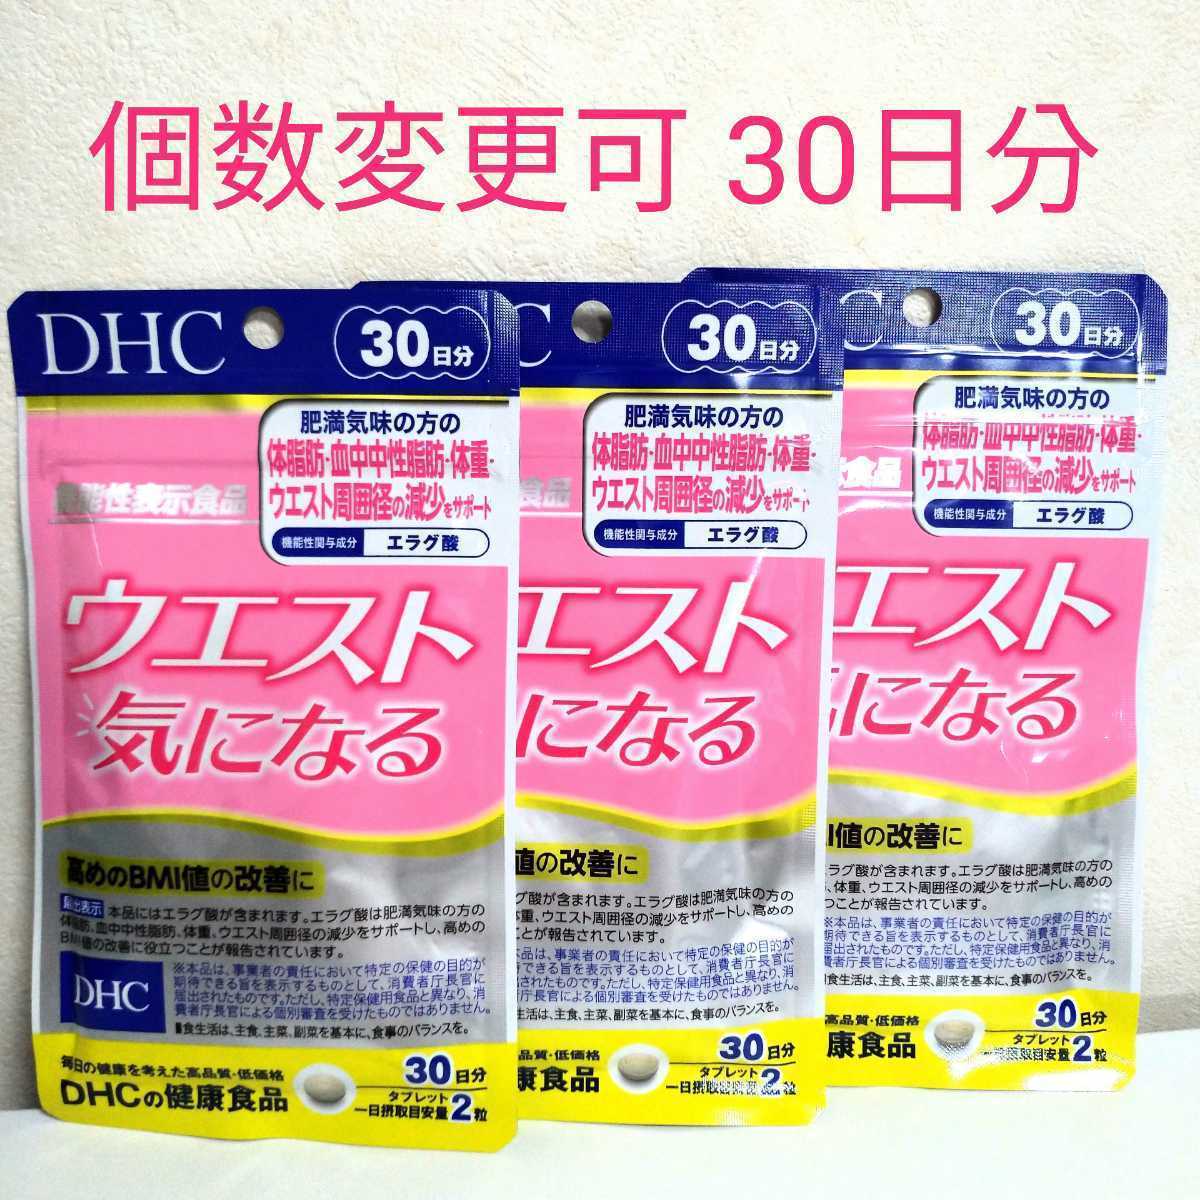 DHC ウエスト気になる30日分×10袋 個数変更可。 - ダイエット